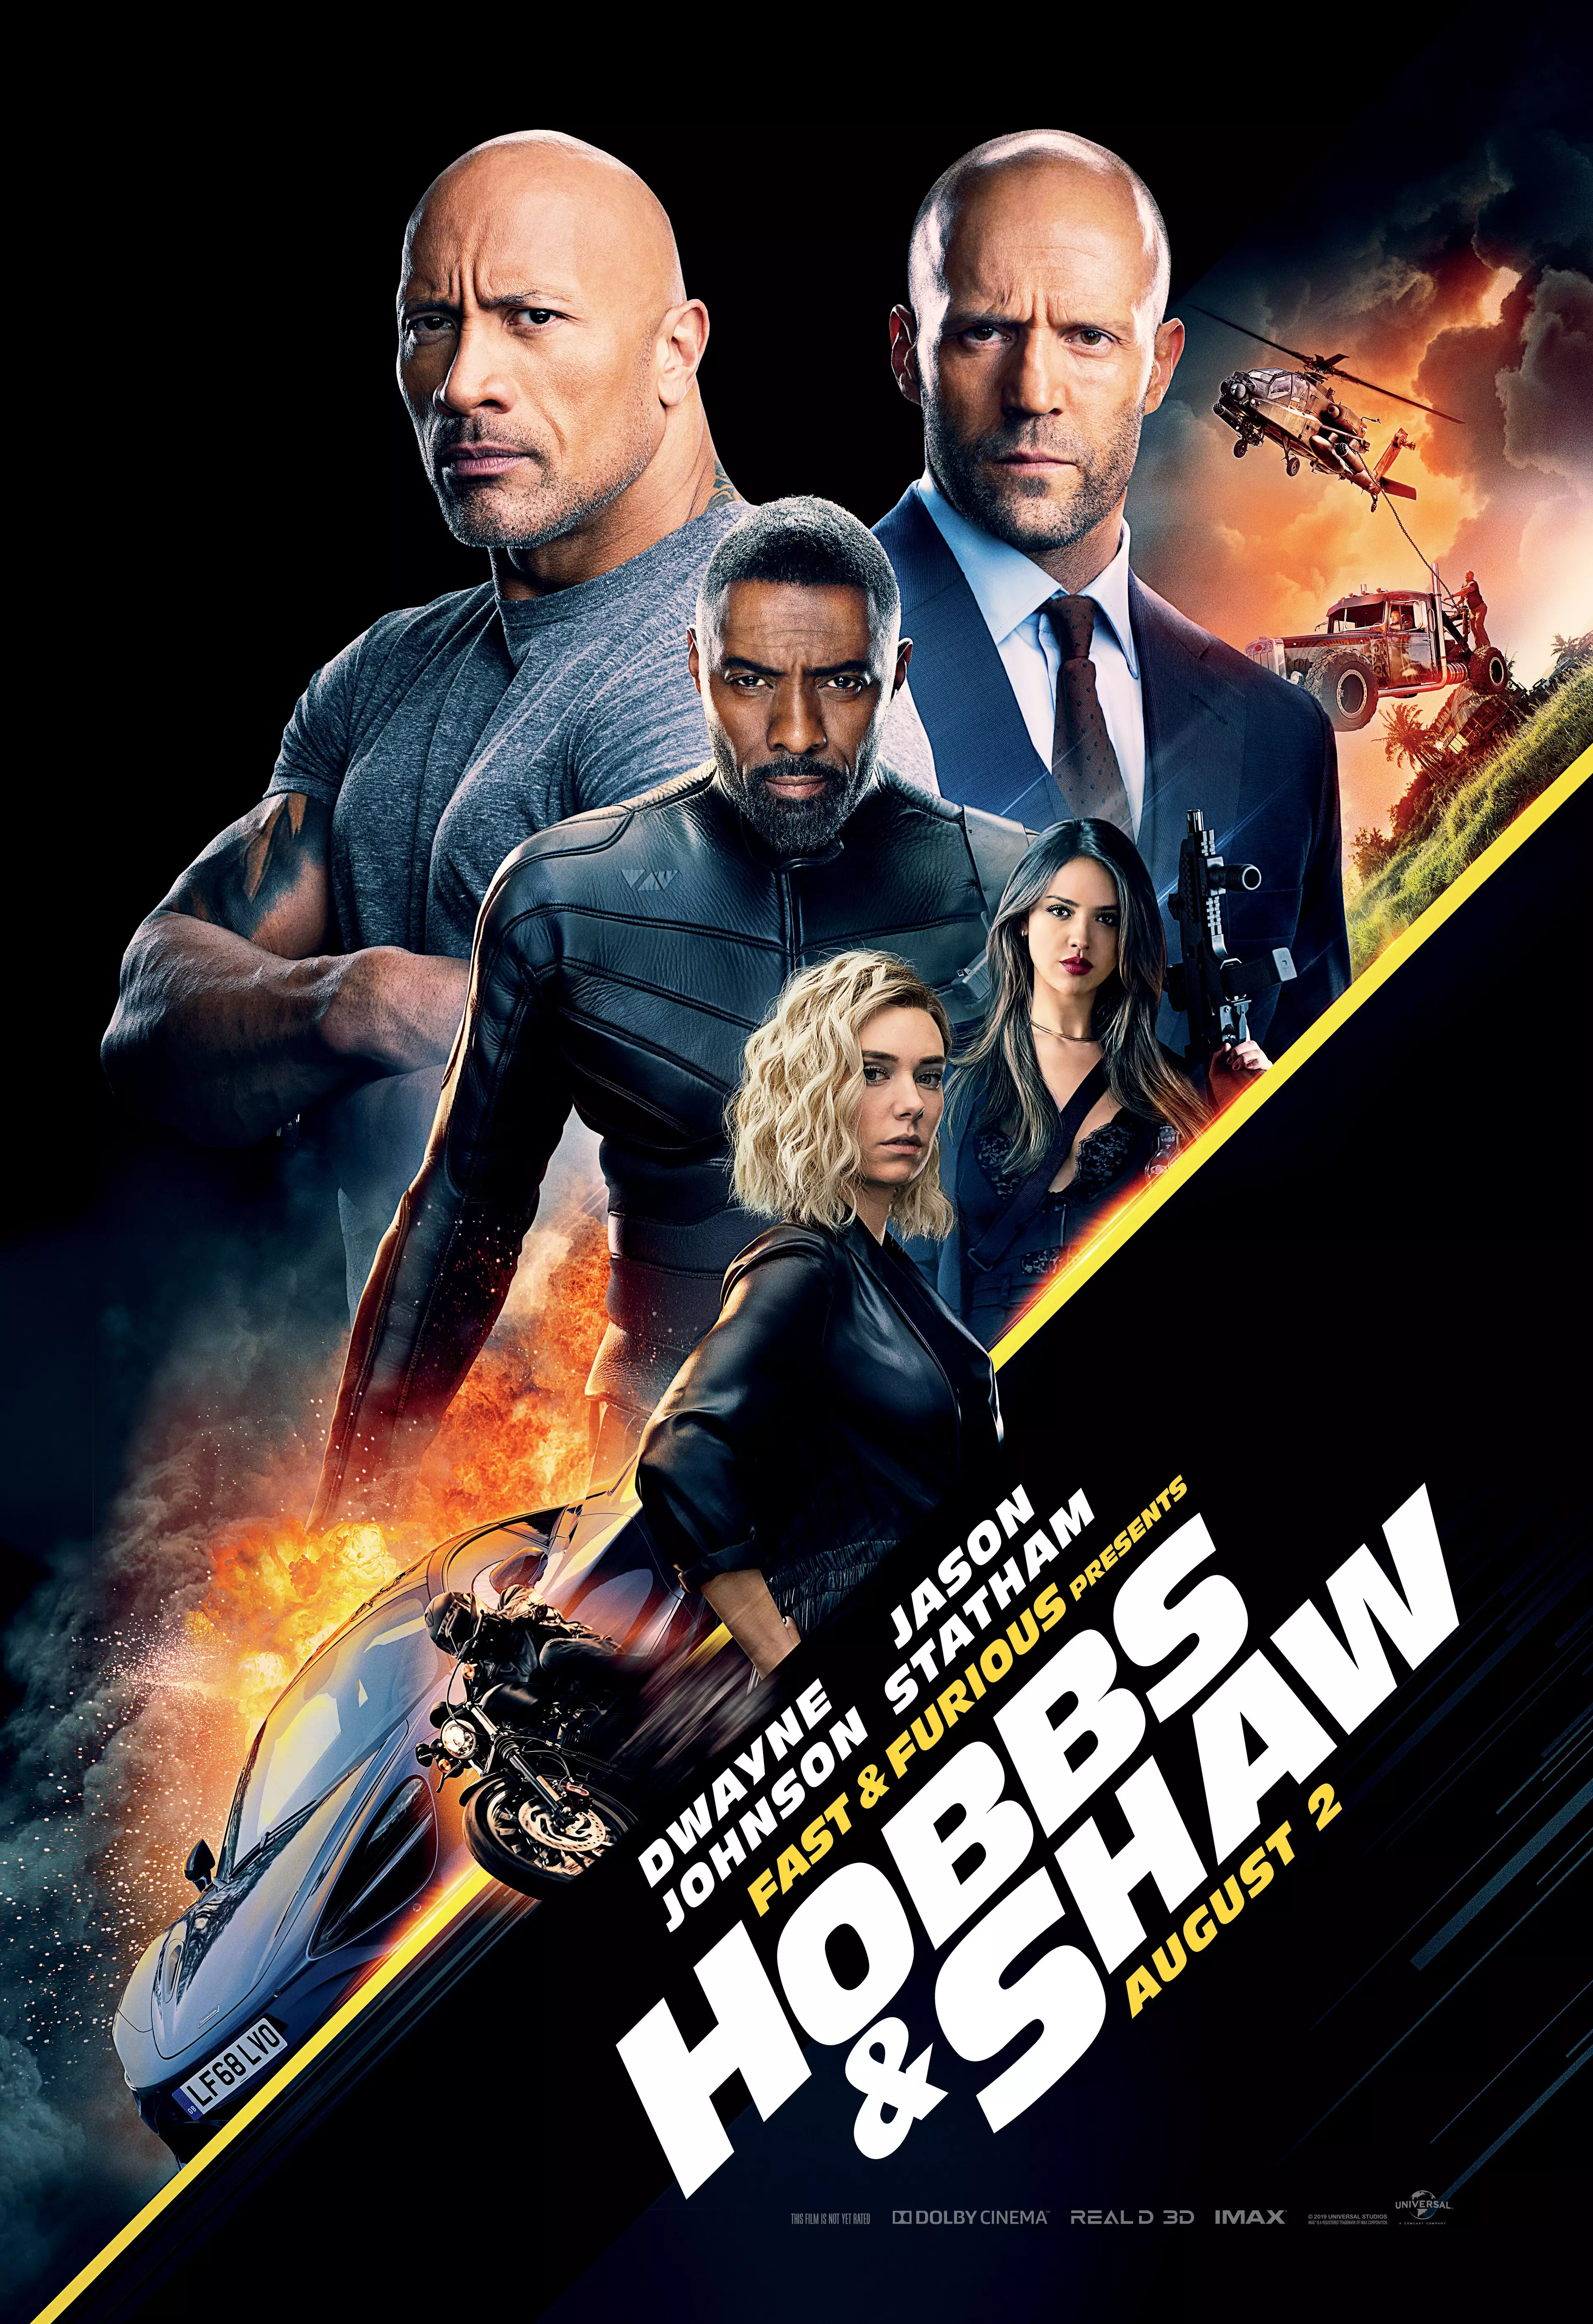 Hobbs and Shaw is a spin-off from the Fast franchise and came out in 2019 '